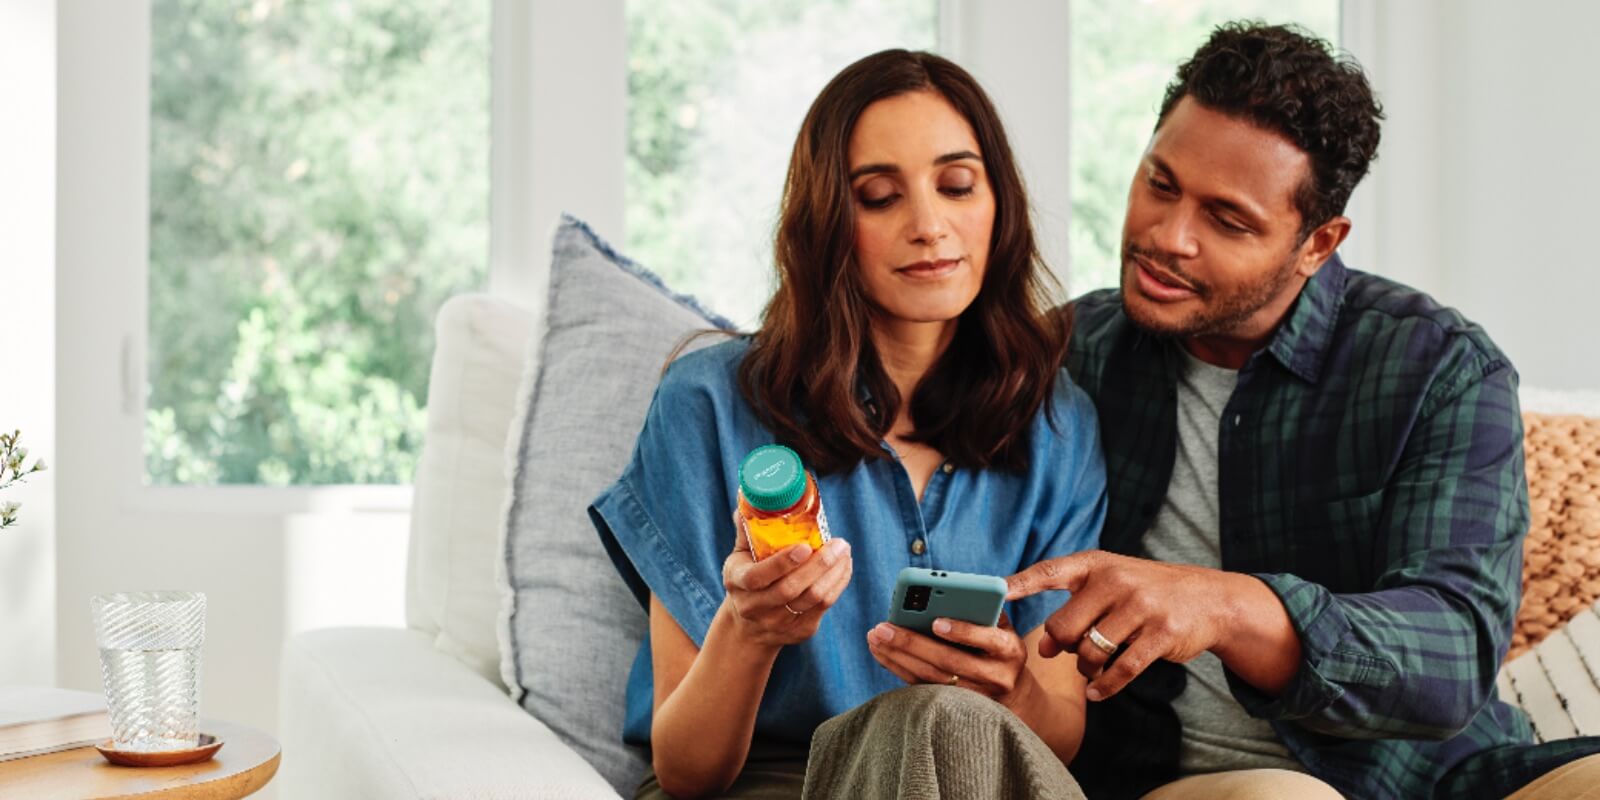 couple looking at prescription drug bottle and phone